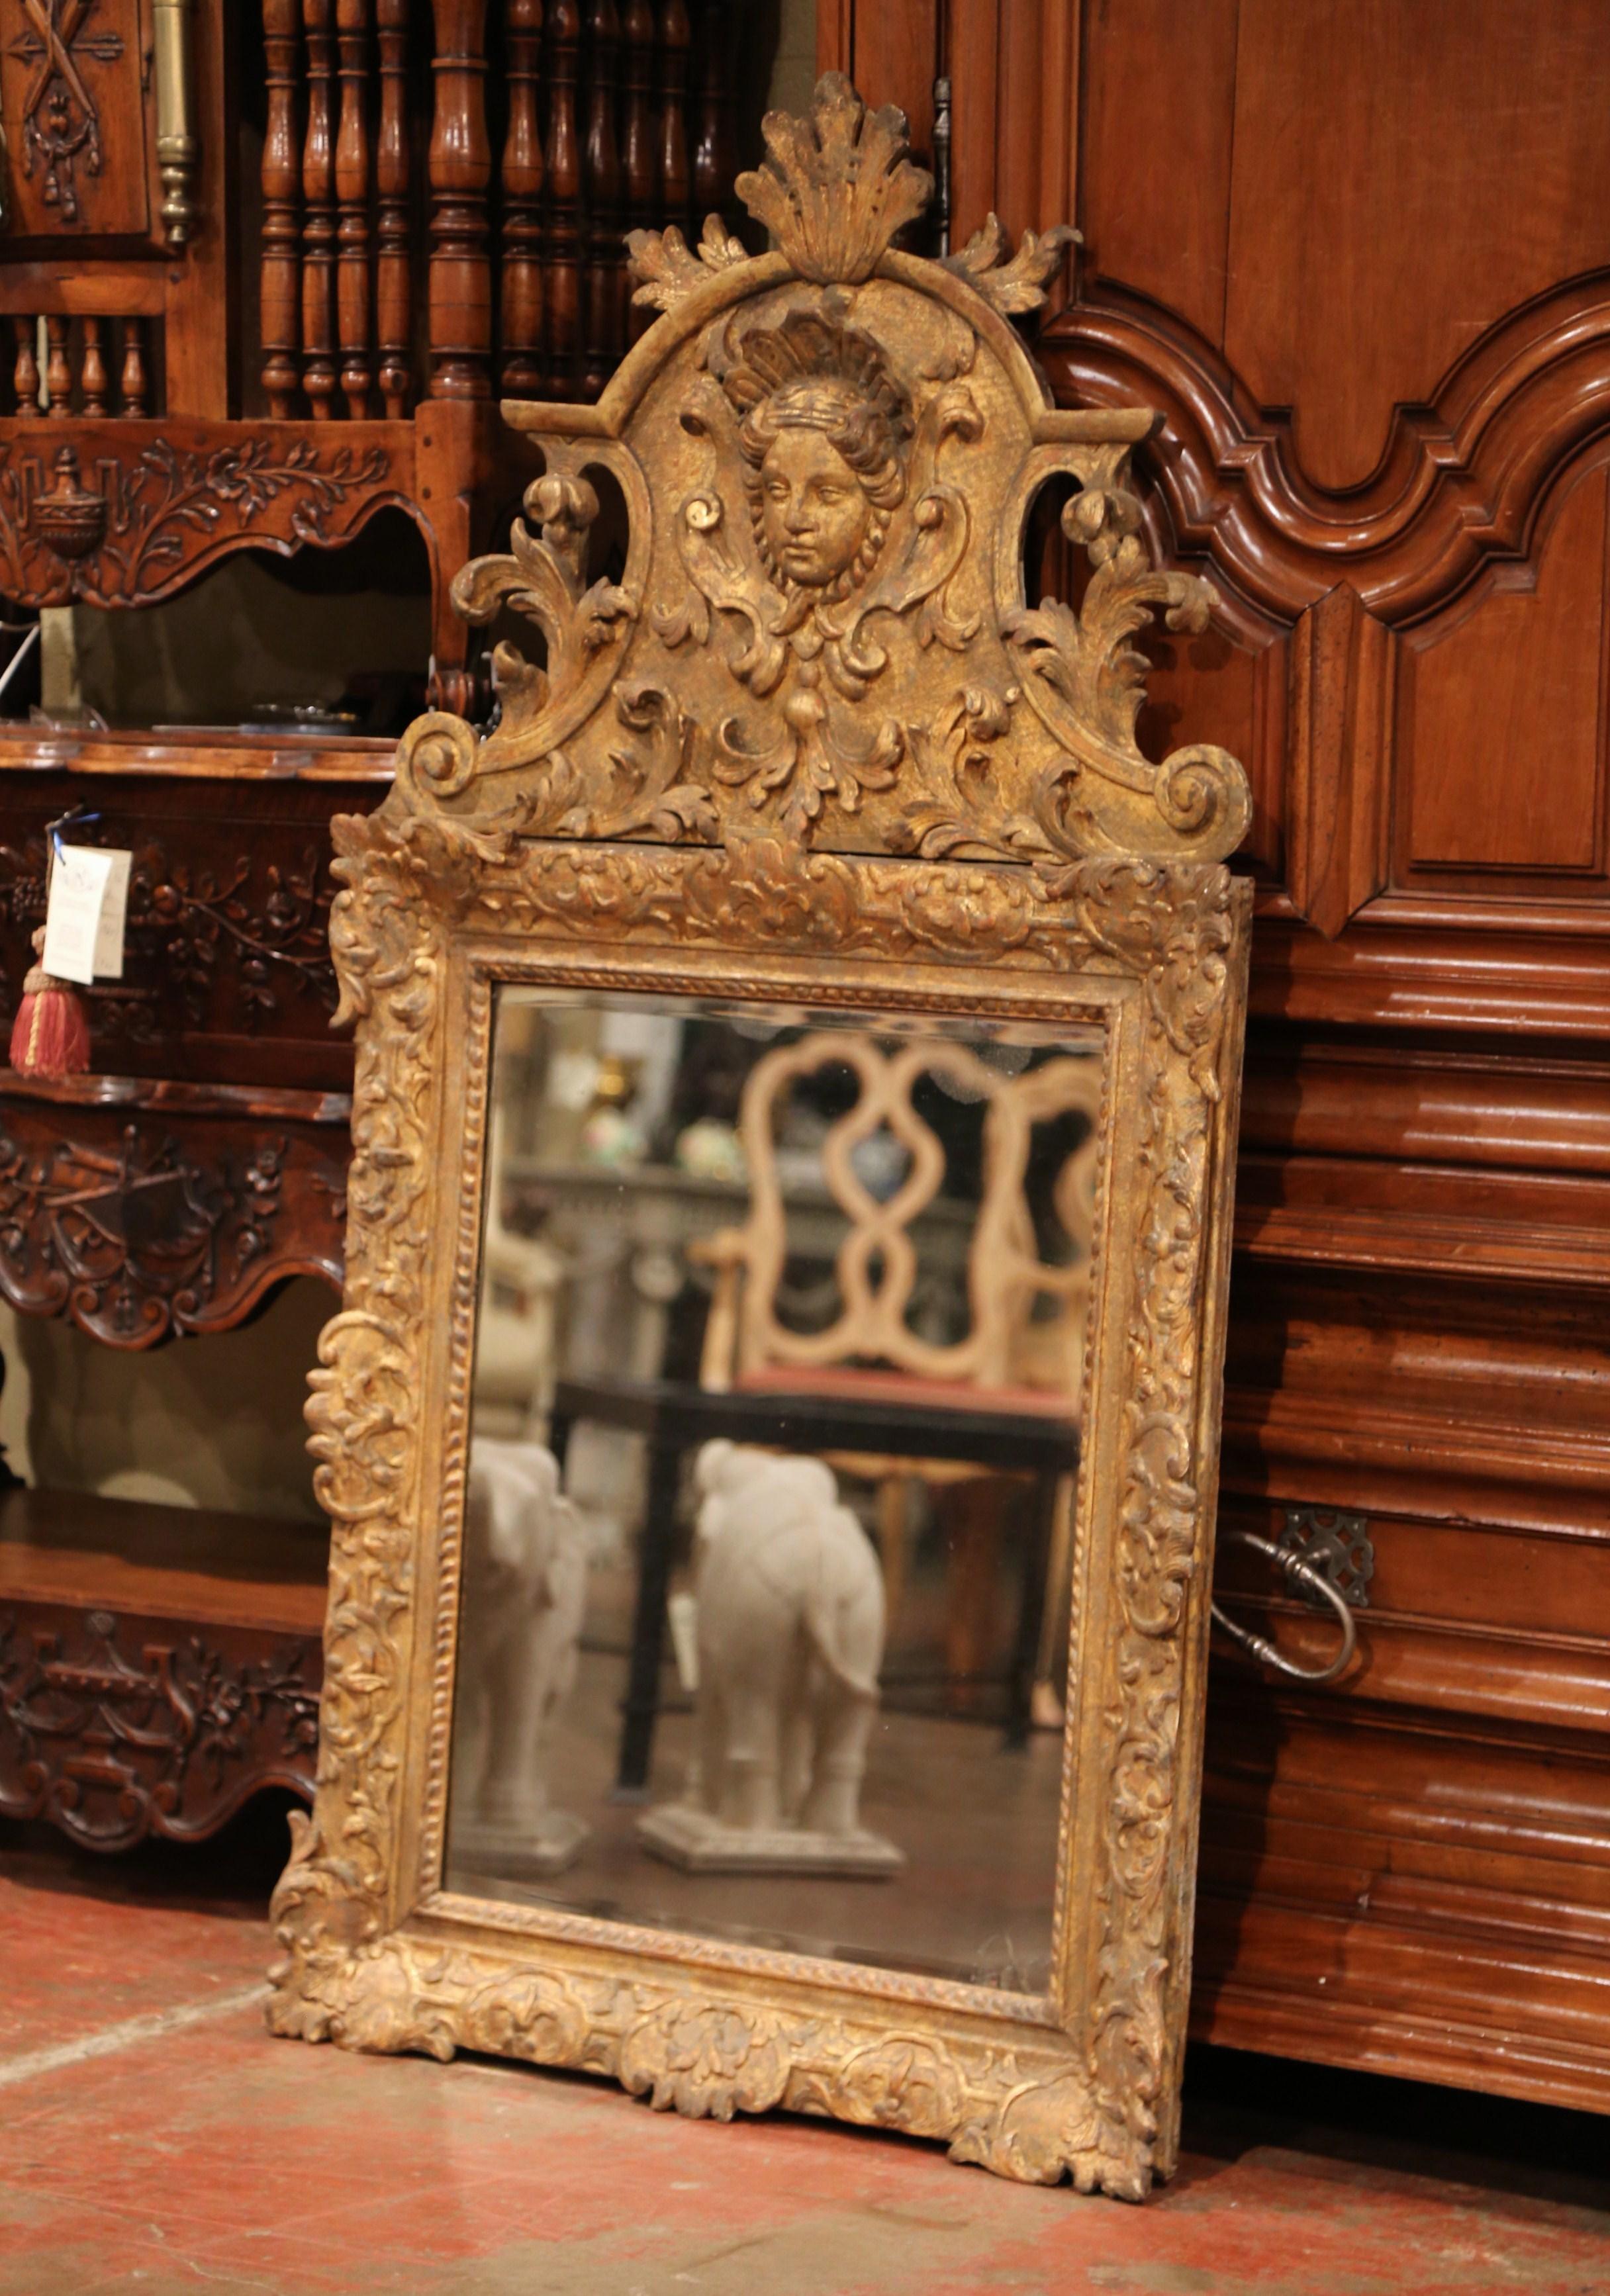 Régence 18th Century French Regence Carved Giltwood Wall Mirror with Ornate Pediment For Sale